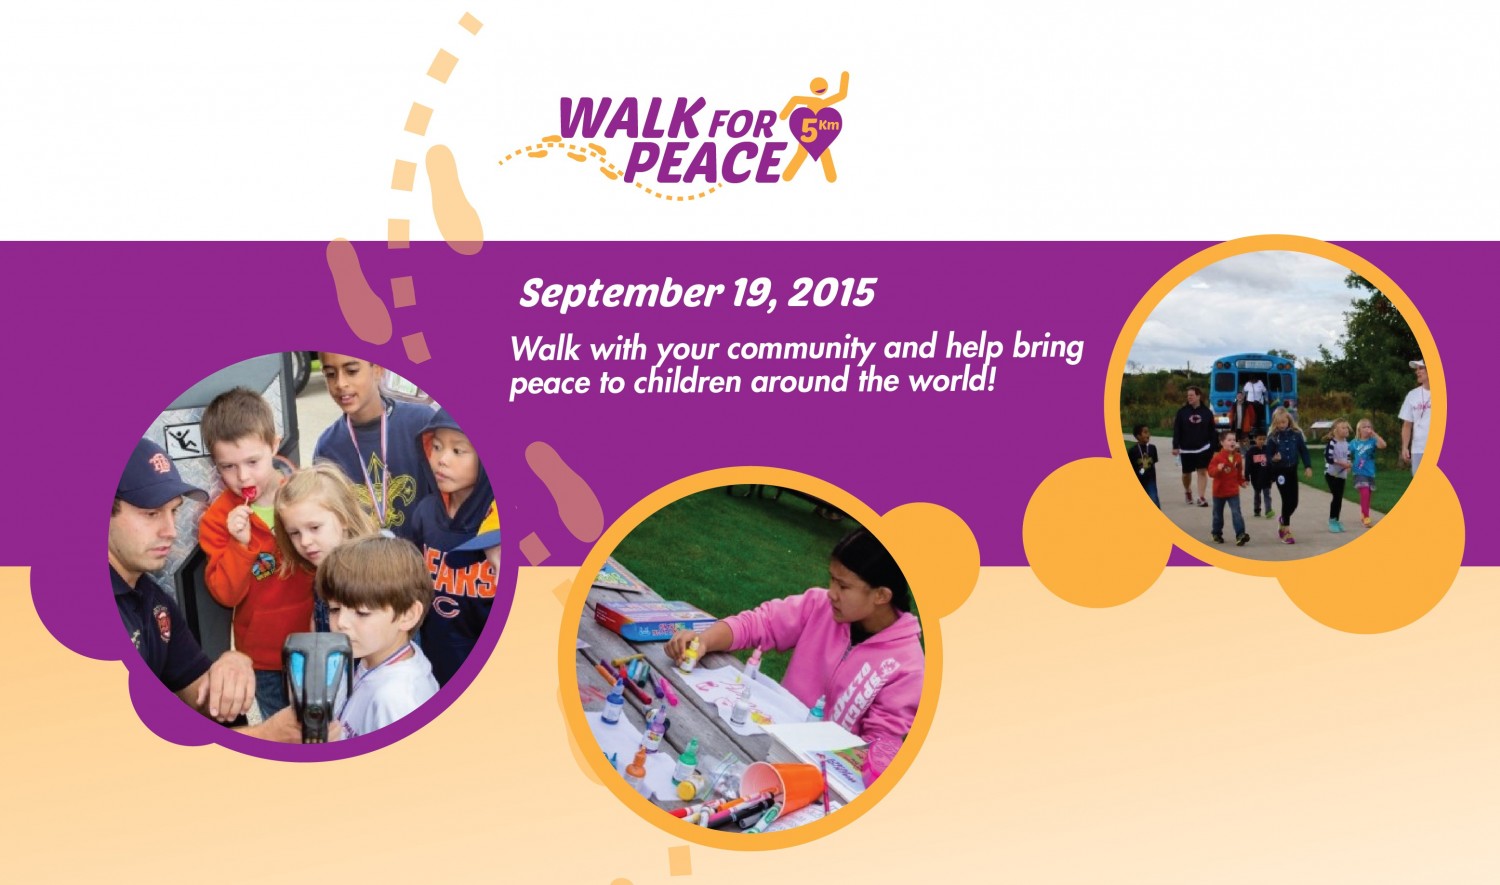 We value your input! You can help make the 2015 Walk for Peace a success!